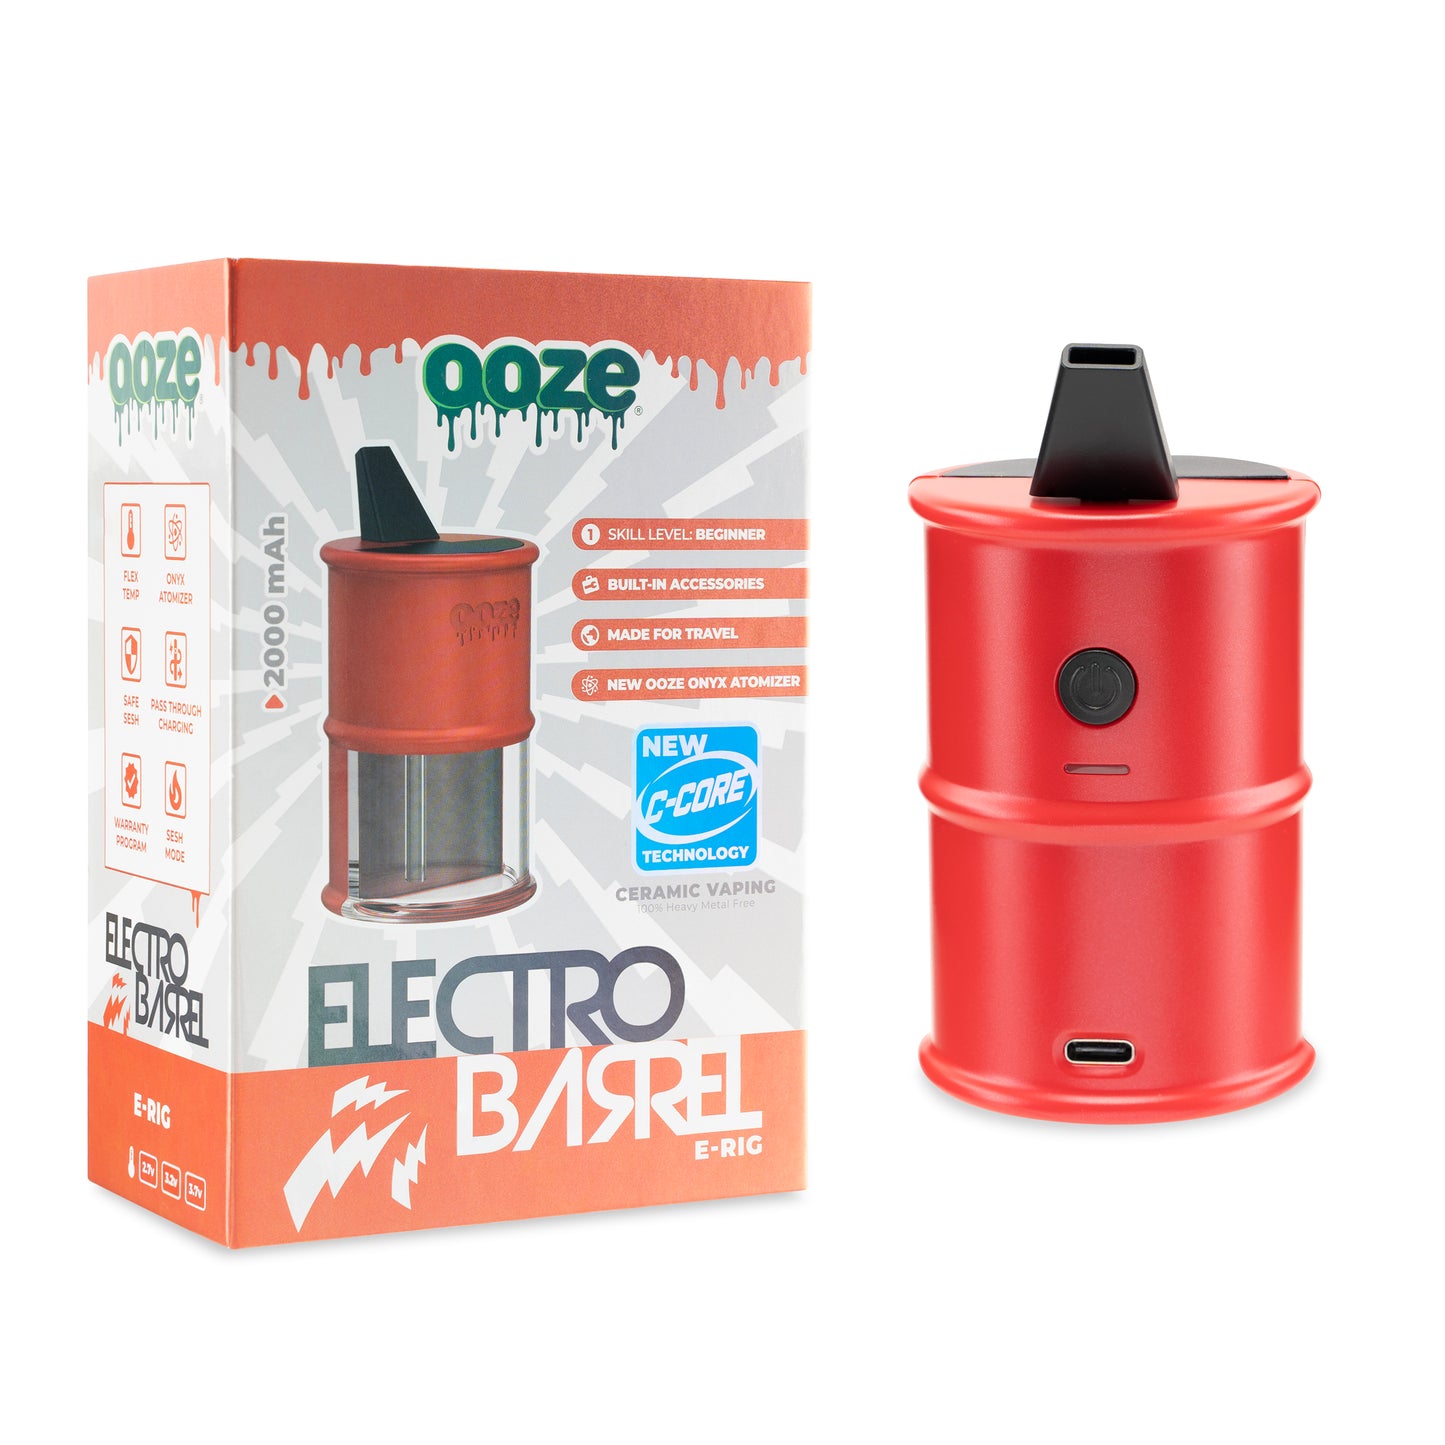 The Ruby Red Ooze Electro Barrel E-Rig is displayed next to its packaging.